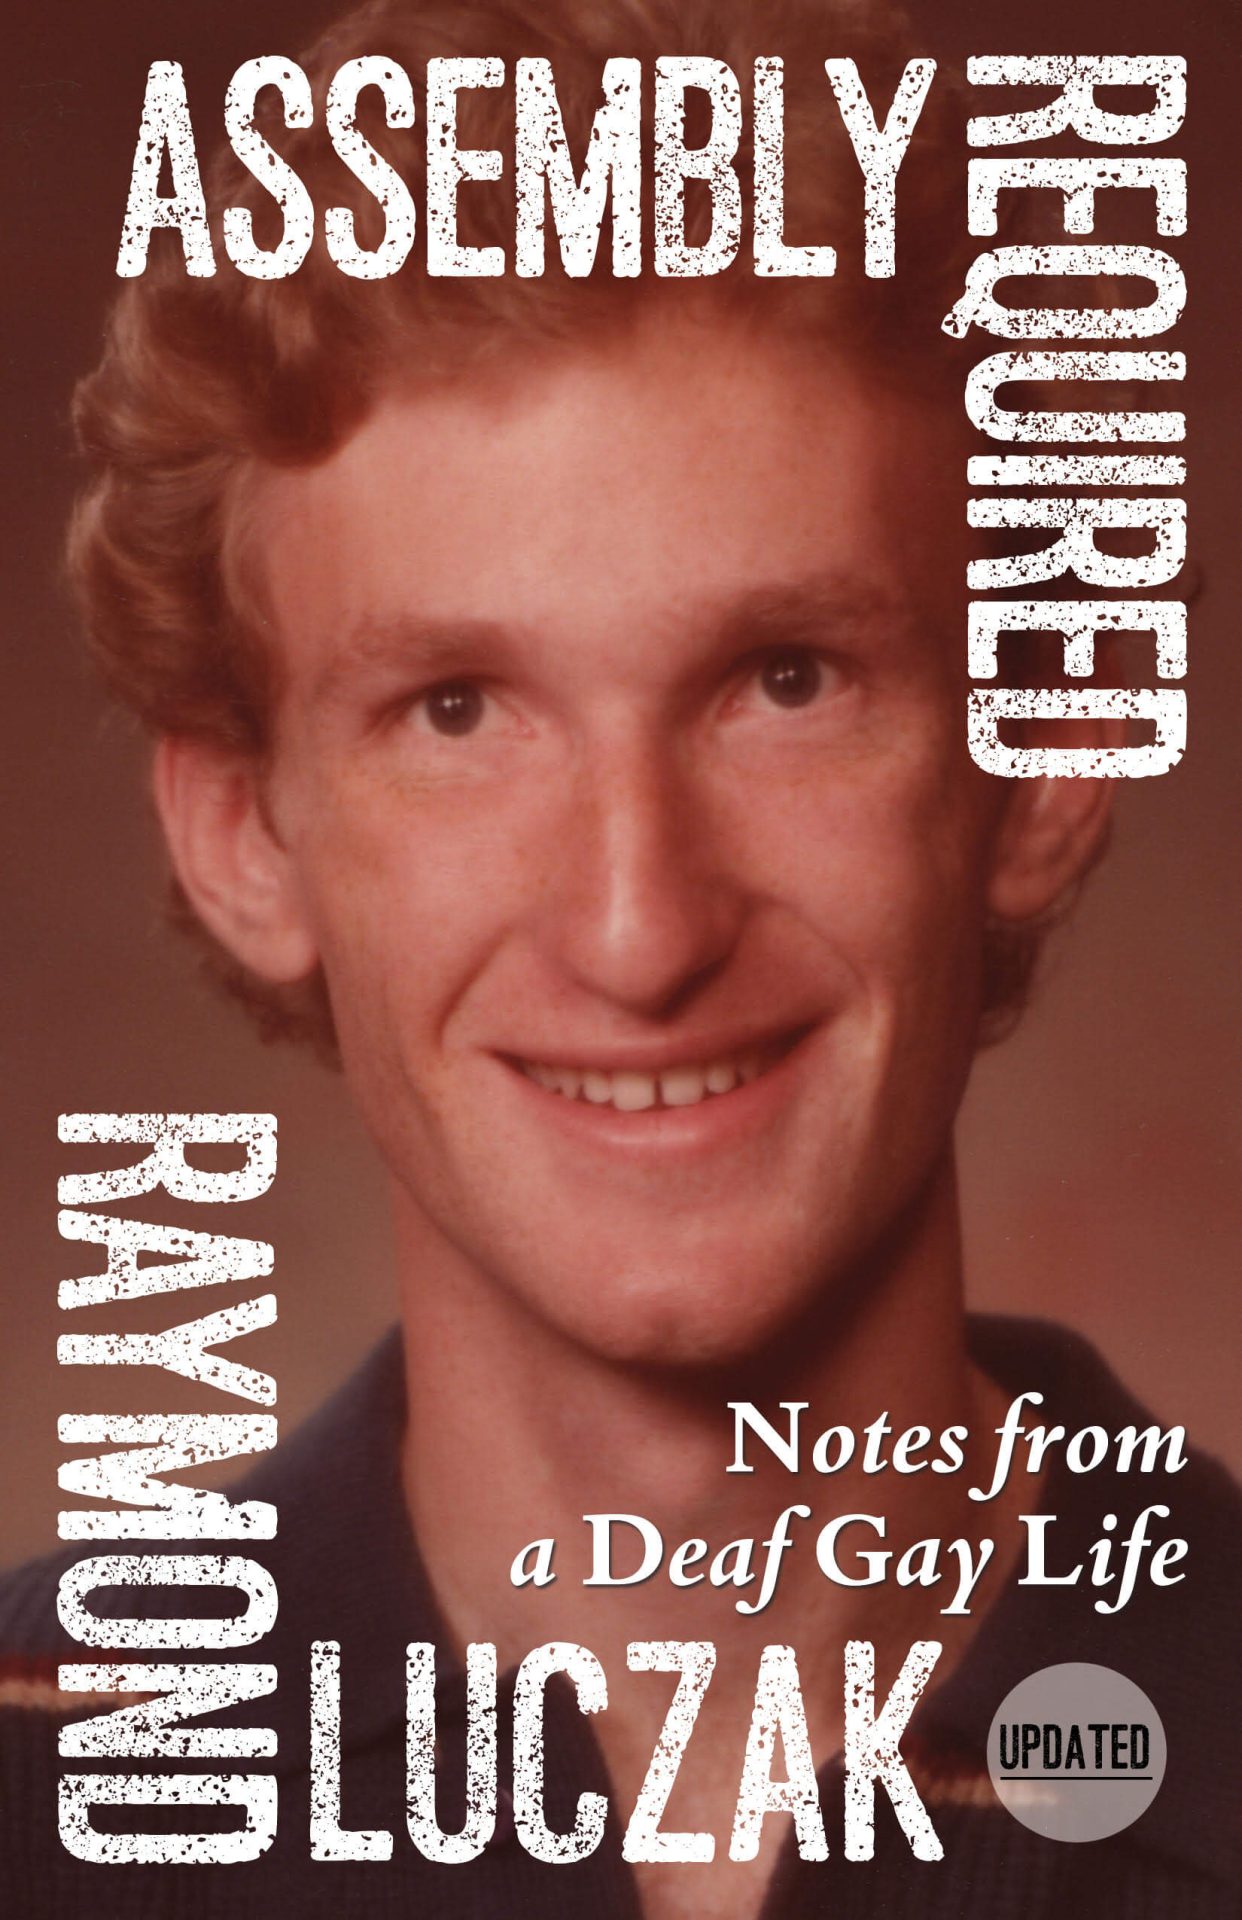 The mostly rust-colored cover shows the author's high school senior picture: He is clean-shaven, smiling with long hair swept to the side; his freckles have been airbrushed out. The title, subtitle, and author's name are arranged somewhat like a picture frame atop the picture: ASSEMBLY REQUIRED | Notes from a Deaf Gay Life (Updated) | RAYMOND LUCZAK.